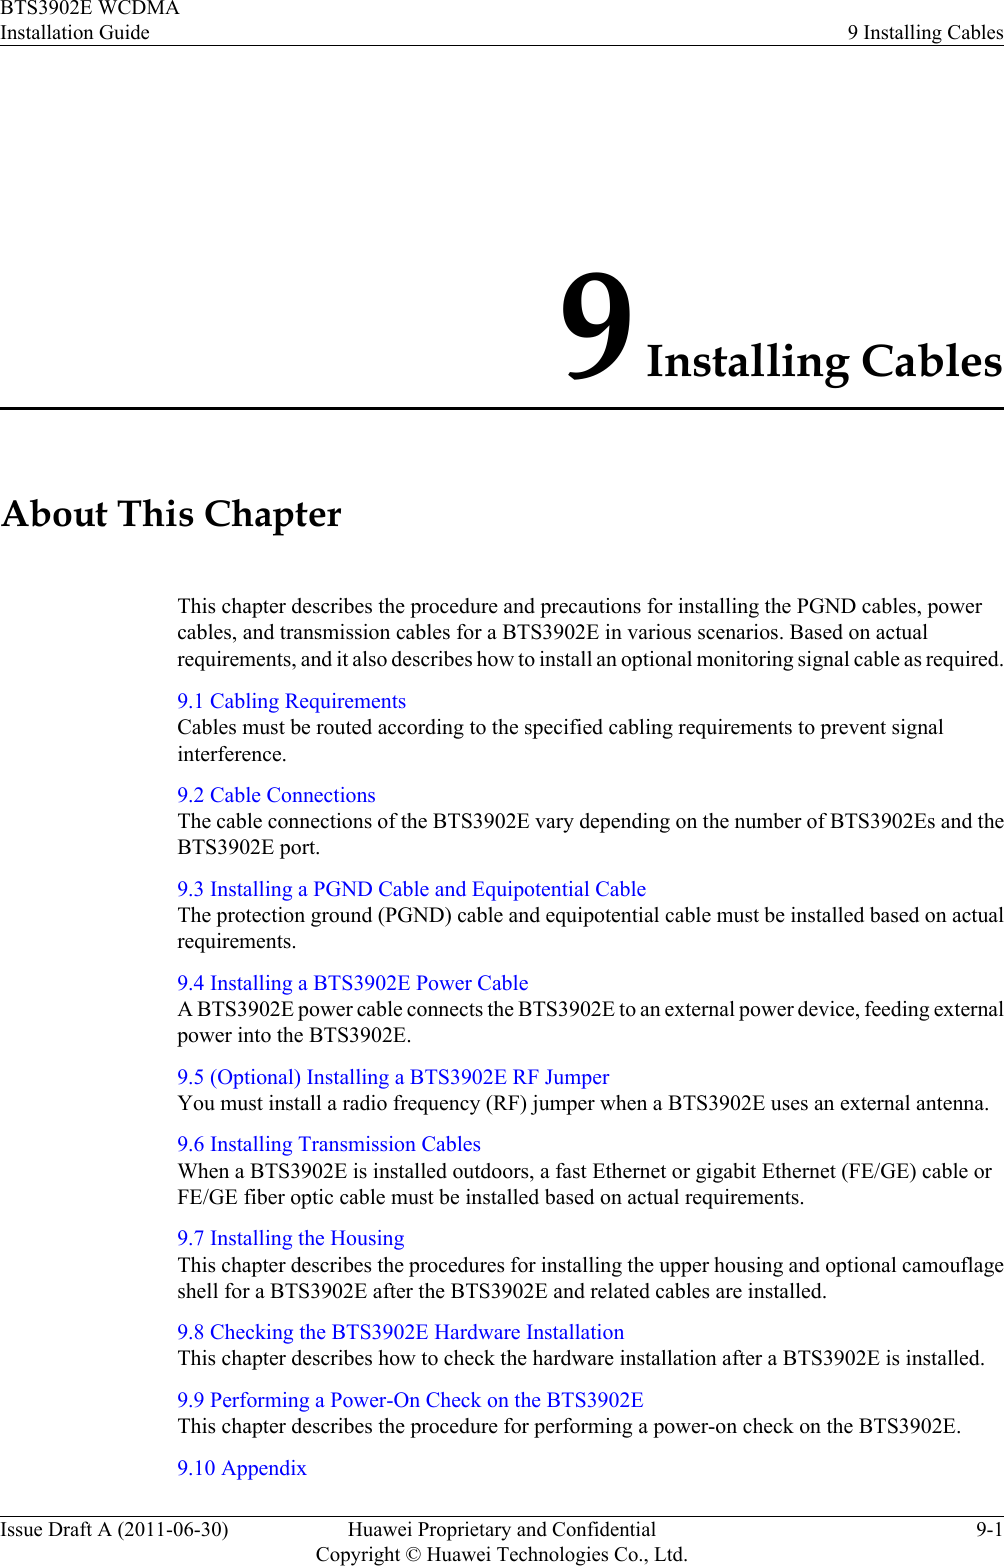 9 Installing CablesAbout This ChapterThis chapter describes the procedure and precautions for installing the PGND cables, powercables, and transmission cables for a BTS3902E in various scenarios. Based on actualrequirements, and it also describes how to install an optional monitoring signal cable as required.9.1 Cabling RequirementsCables must be routed according to the specified cabling requirements to prevent signalinterference.9.2 Cable ConnectionsThe cable connections of the BTS3902E vary depending on the number of BTS3902Es and theBTS3902E port.9.3 Installing a PGND Cable and Equipotential CableThe protection ground (PGND) cable and equipotential cable must be installed based on actualrequirements.9.4 Installing a BTS3902E Power CableA BTS3902E power cable connects the BTS3902E to an external power device, feeding externalpower into the BTS3902E.9.5 (Optional) Installing a BTS3902E RF JumperYou must install a radio frequency (RF) jumper when a BTS3902E uses an external antenna.9.6 Installing Transmission CablesWhen a BTS3902E is installed outdoors, a fast Ethernet or gigabit Ethernet (FE/GE) cable orFE/GE fiber optic cable must be installed based on actual requirements.9.7 Installing the HousingThis chapter describes the procedures for installing the upper housing and optional camouflageshell for a BTS3902E after the BTS3902E and related cables are installed.9.8 Checking the BTS3902E Hardware InstallationThis chapter describes how to check the hardware installation after a BTS3902E is installed.9.9 Performing a Power-On Check on the BTS3902EThis chapter describes the procedure for performing a power-on check on the BTS3902E.9.10 AppendixBTS3902E WCDMAInstallation Guide 9 Installing CablesIssue Draft A (2011-06-30) Huawei Proprietary and ConfidentialCopyright © Huawei Technologies Co., Ltd.9-1